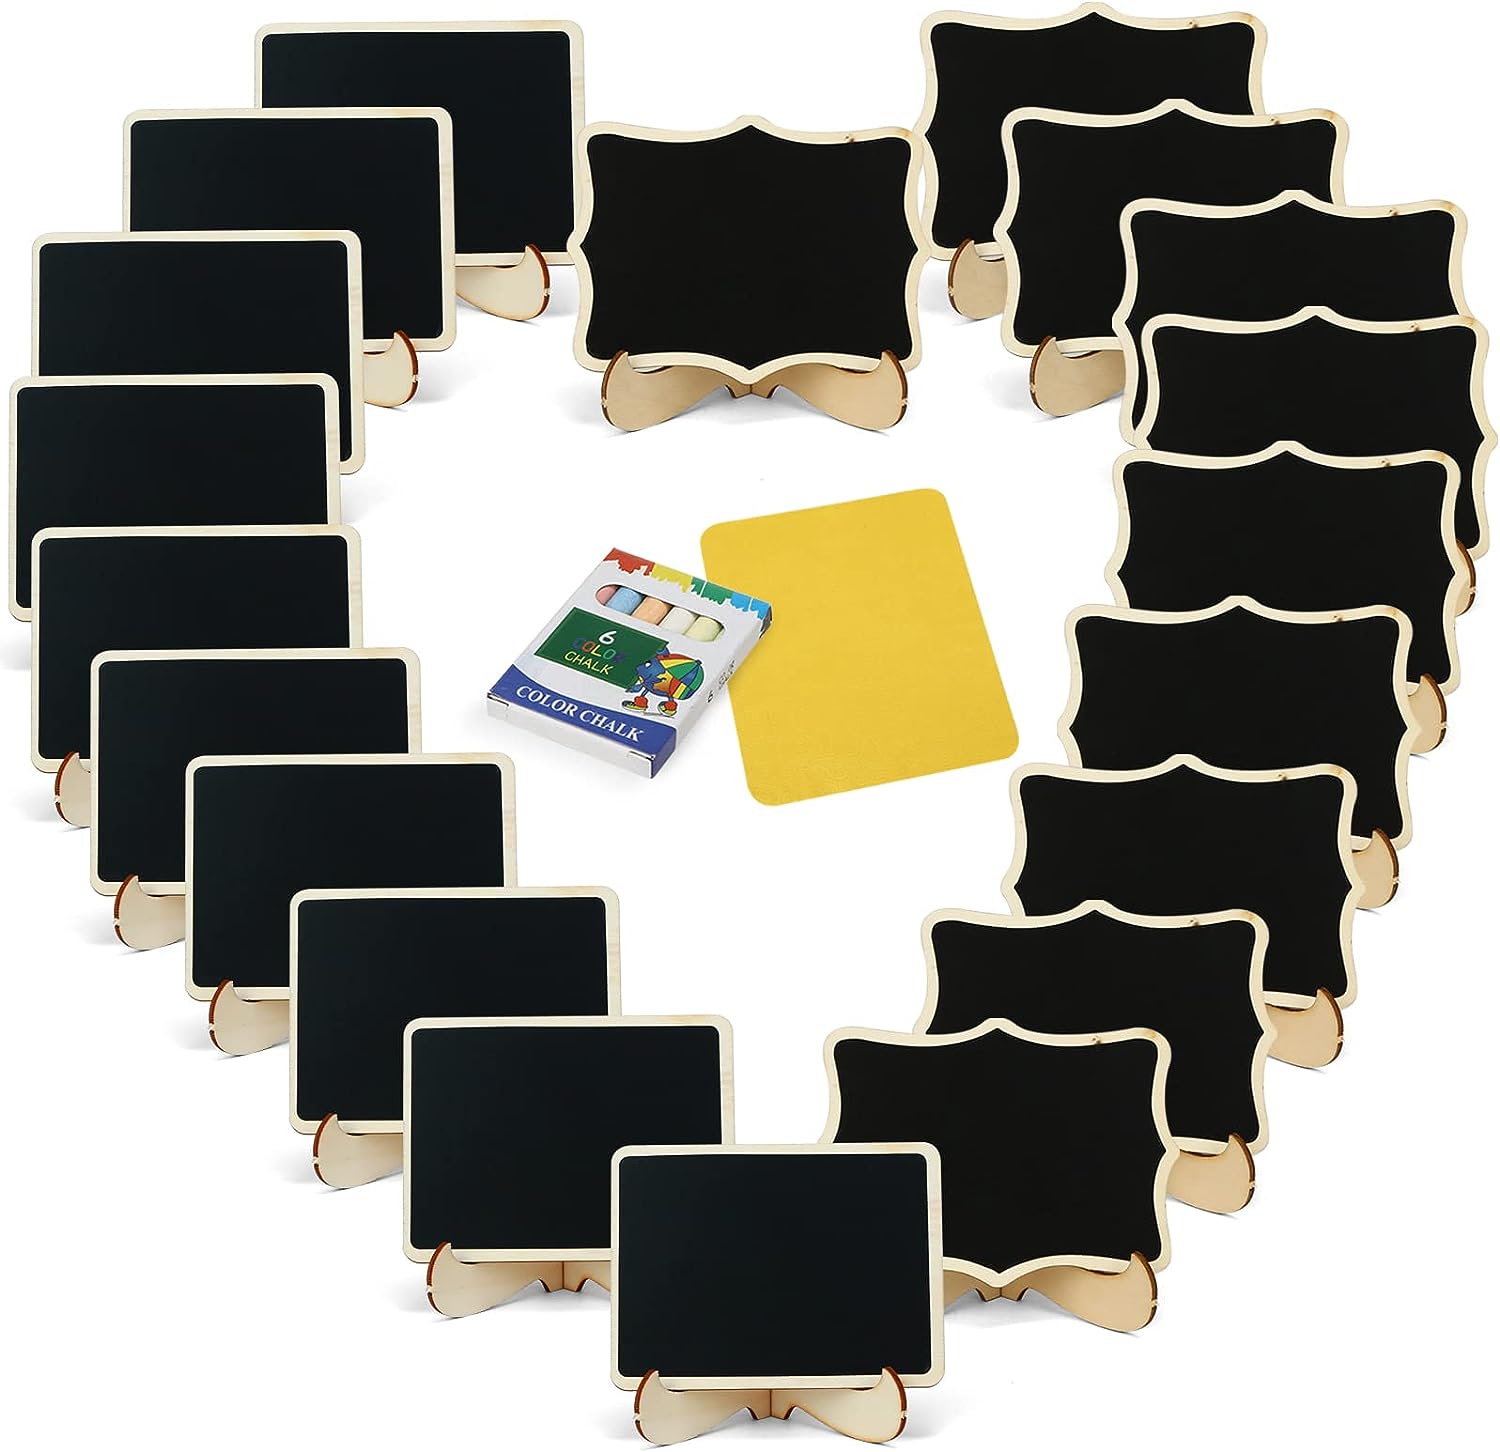 FUTUREPLUSX 20 Pack Mini Chalkboards Signs with Easel [...]